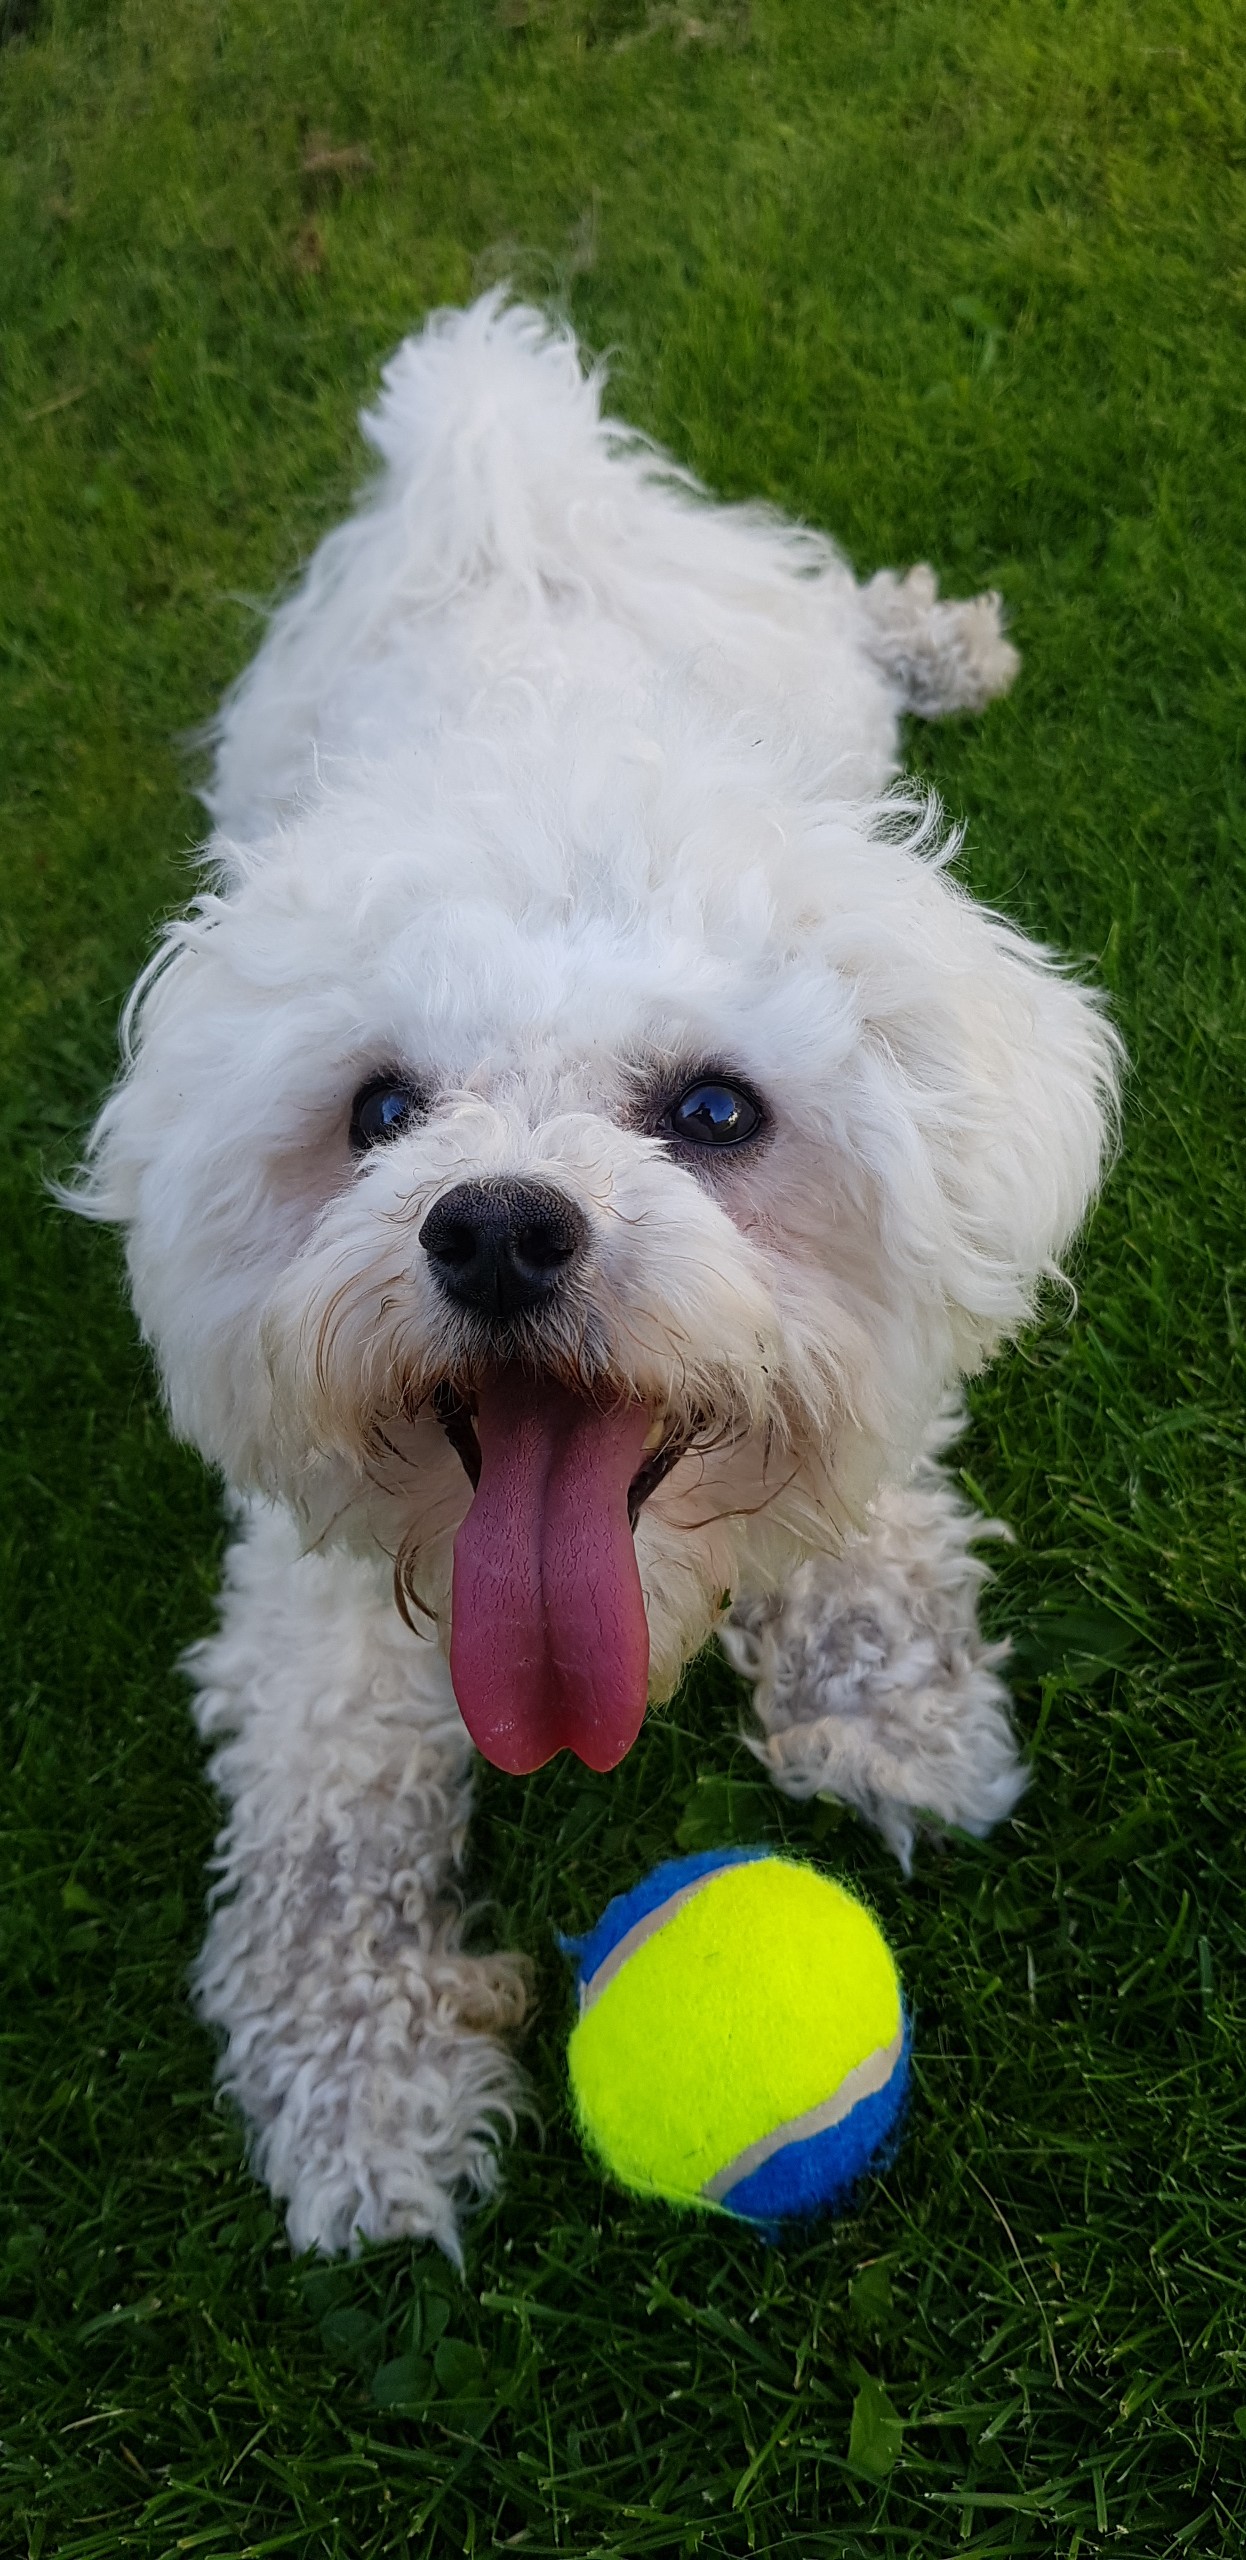 A happy Bichon Frise lying in the yard with its tennis ball